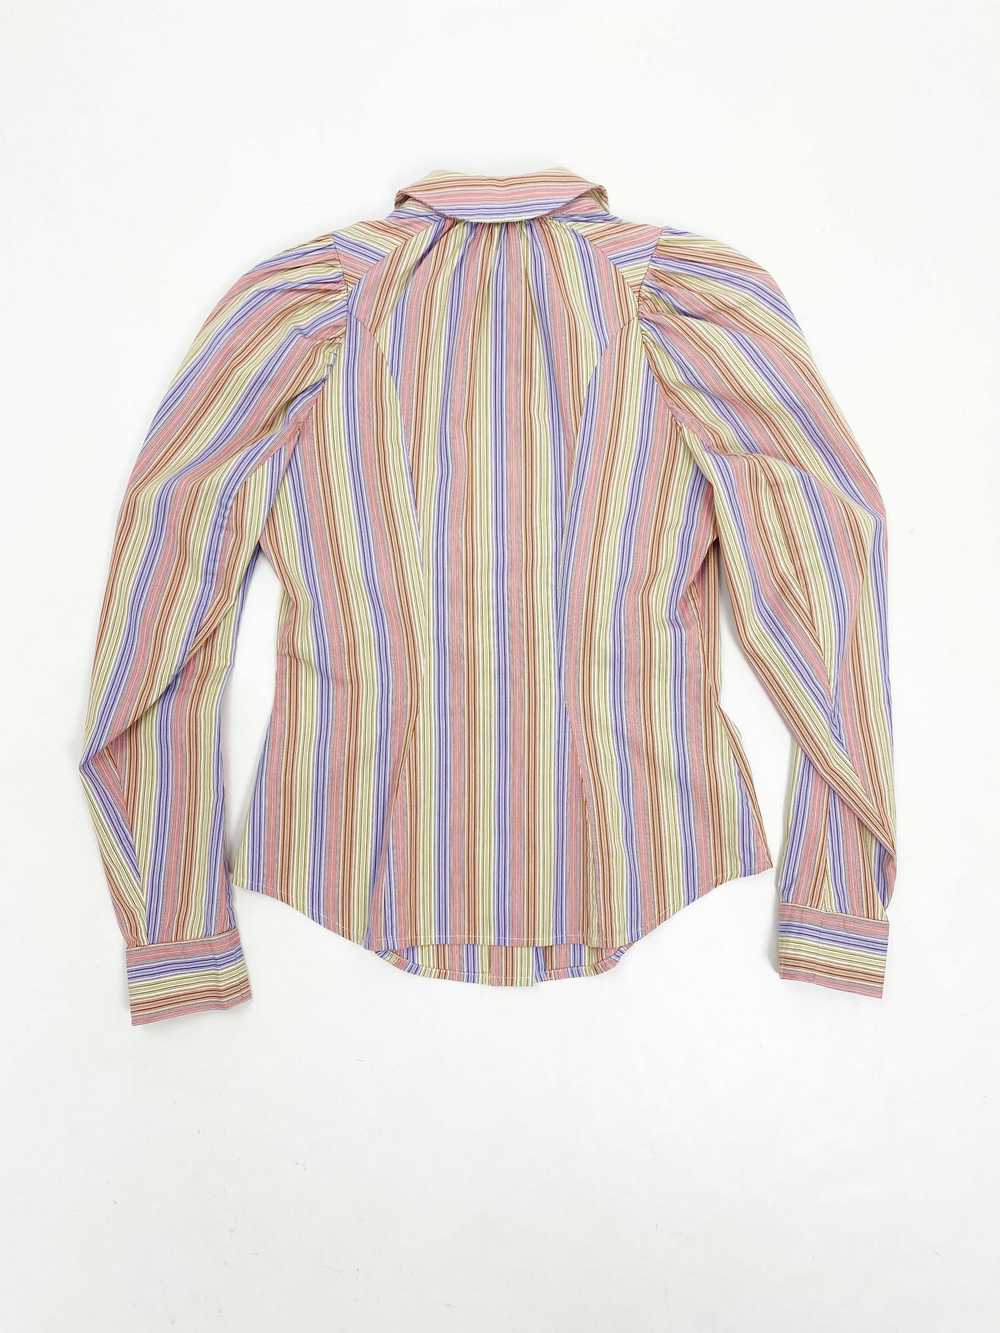 Vivienne Westwood 90s puff sleeve striped shirt - image 2